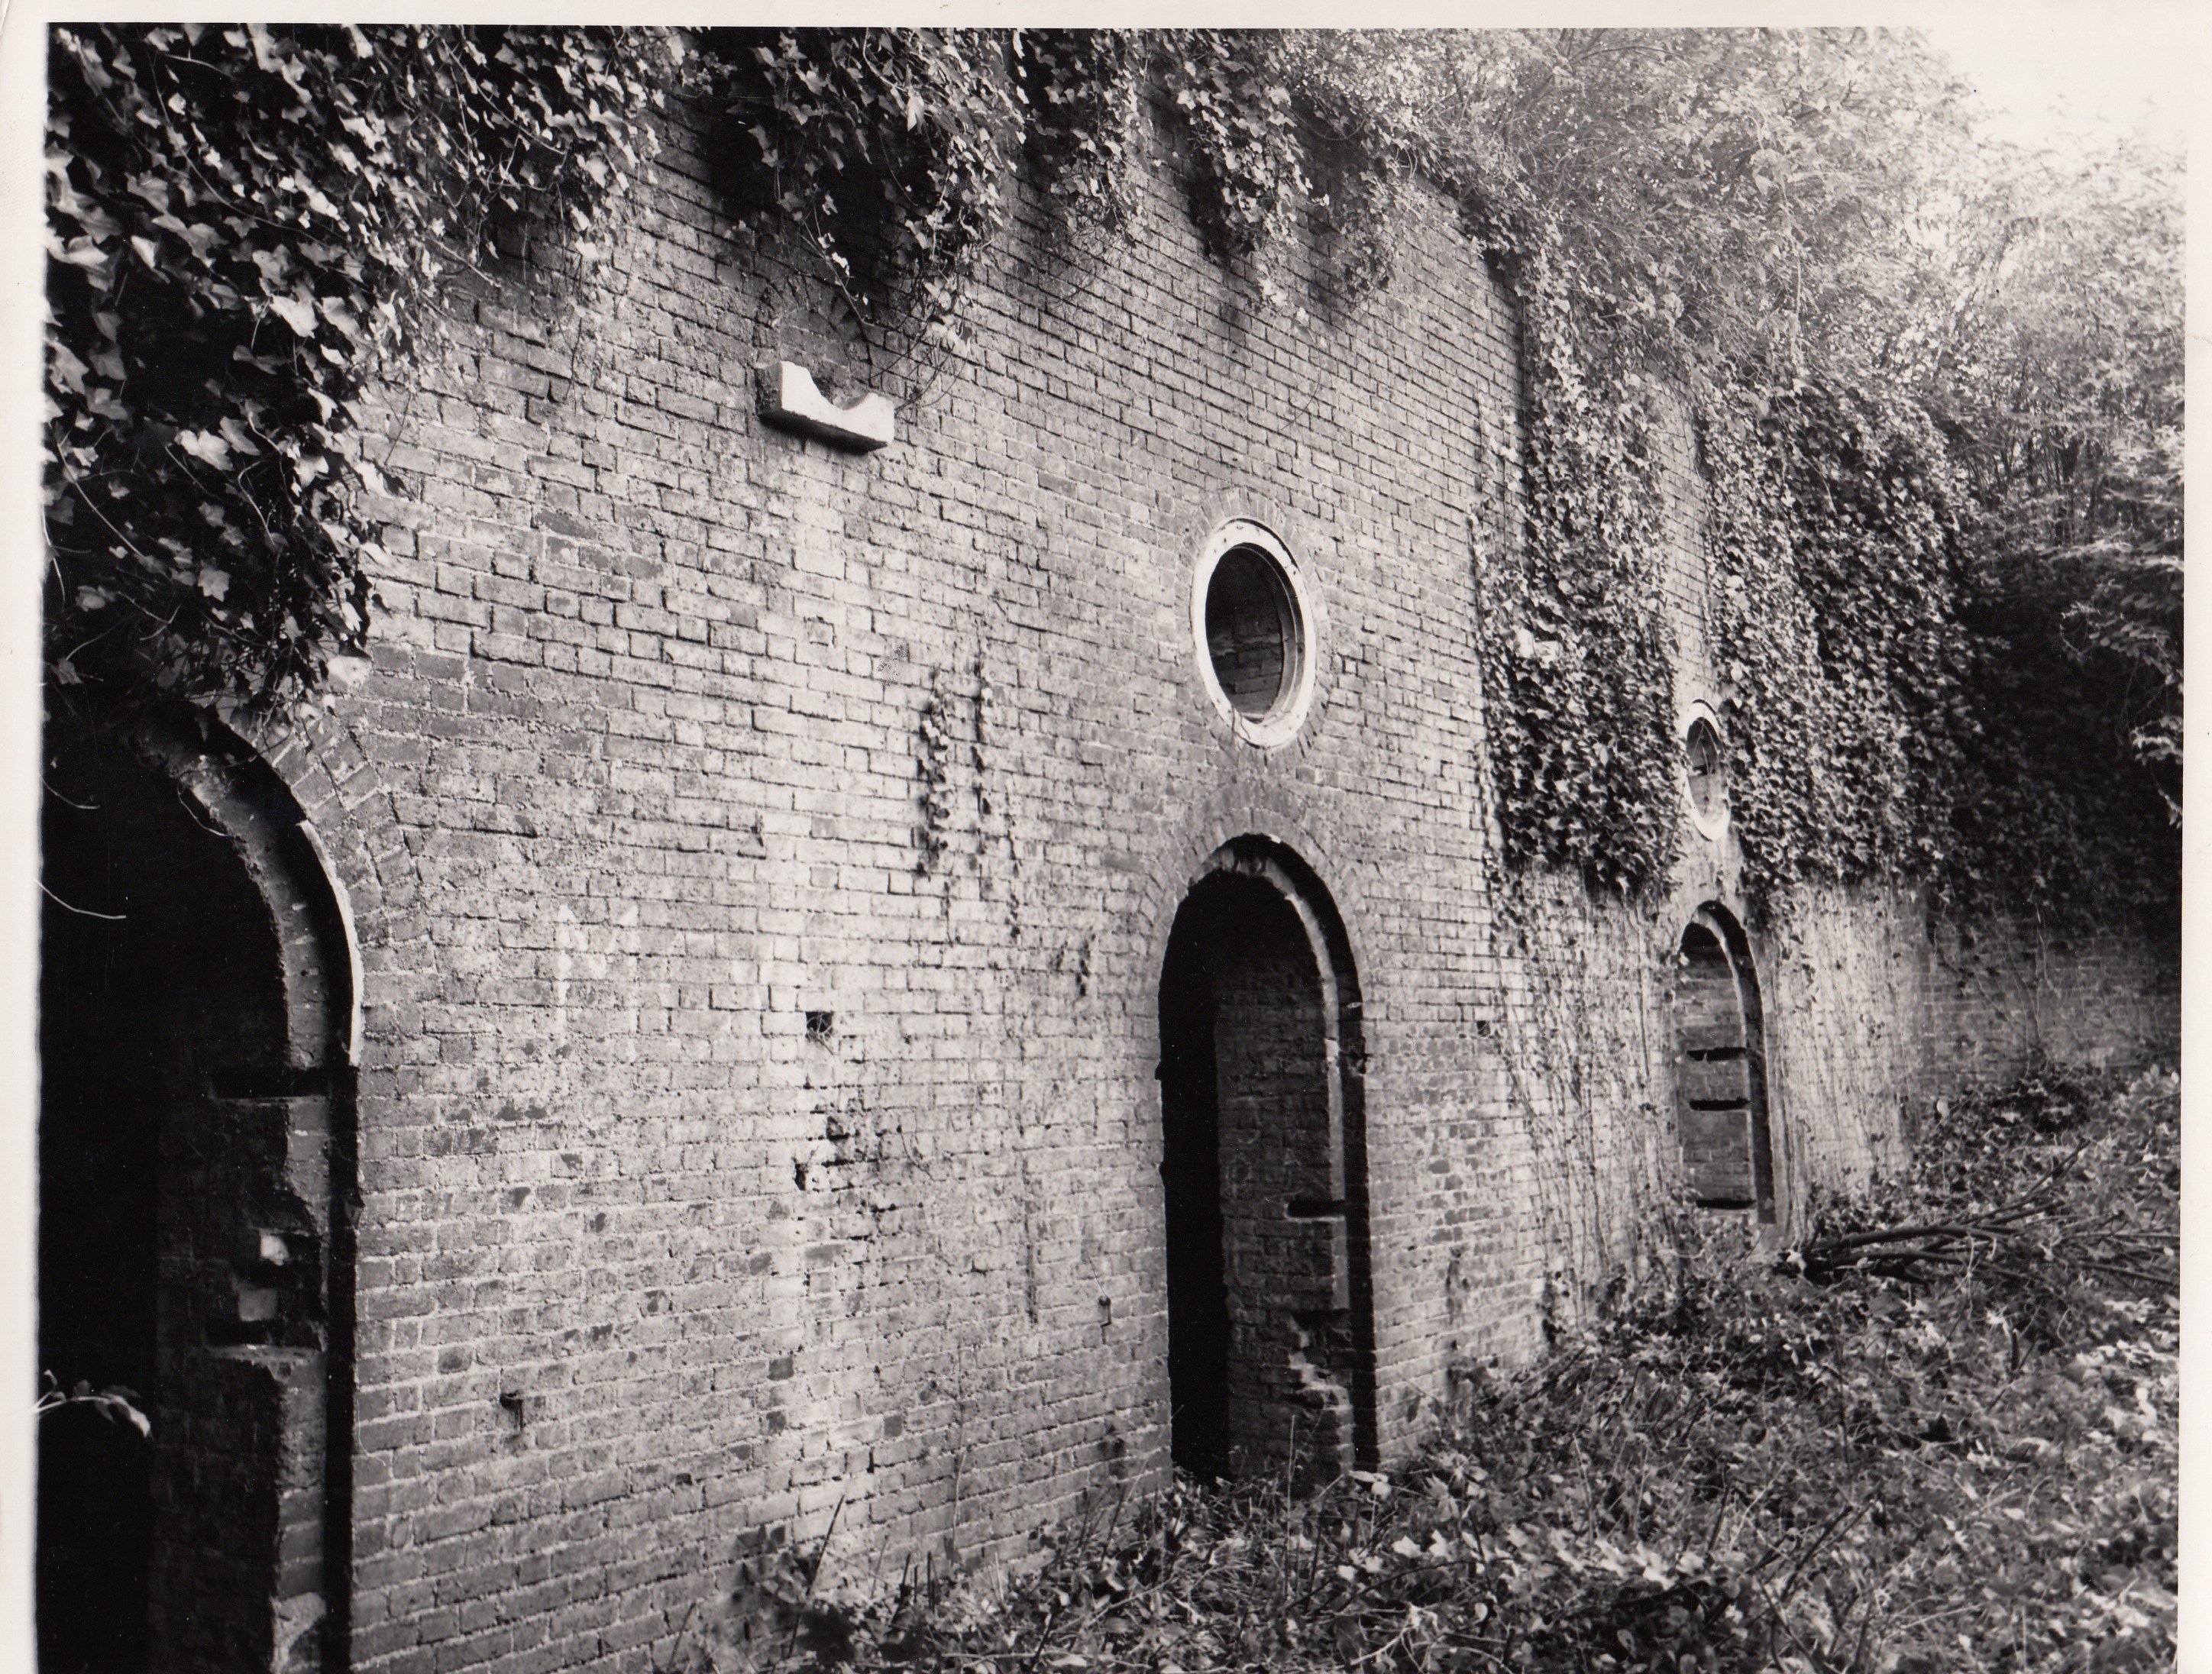 Black and white photo of high brick casemates with arched openings at ground level and circular windows.